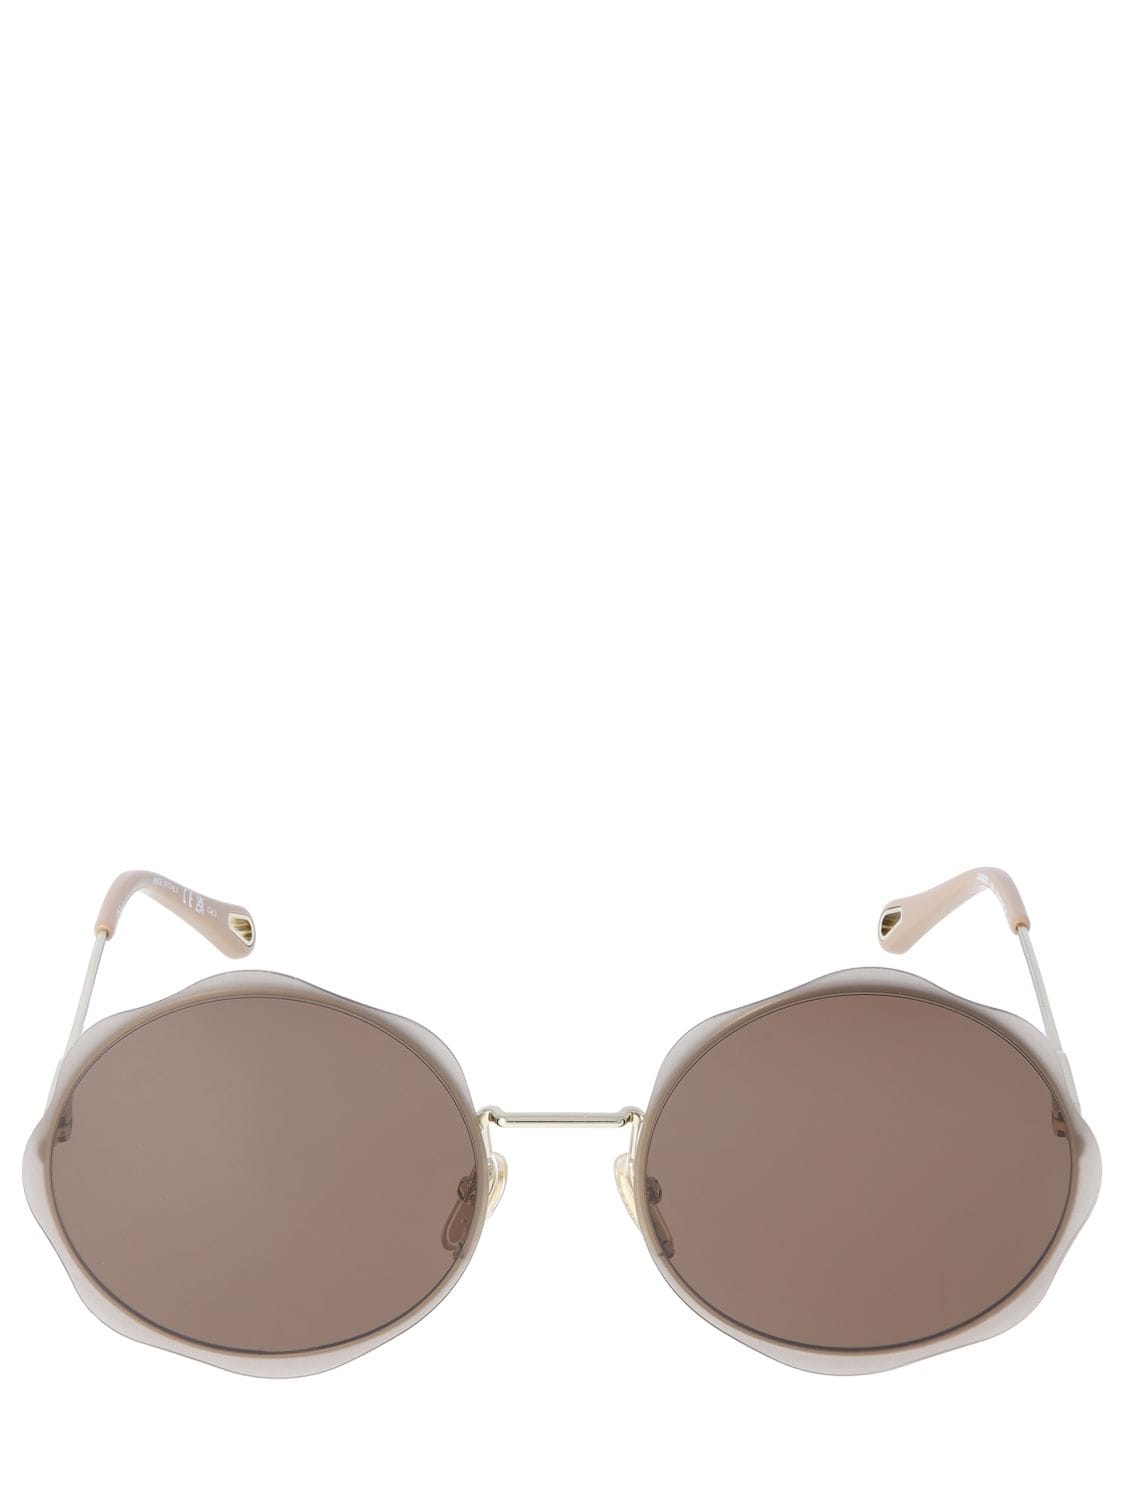 Chloé Honoré Round Metal Sunglasses In Gold,brown